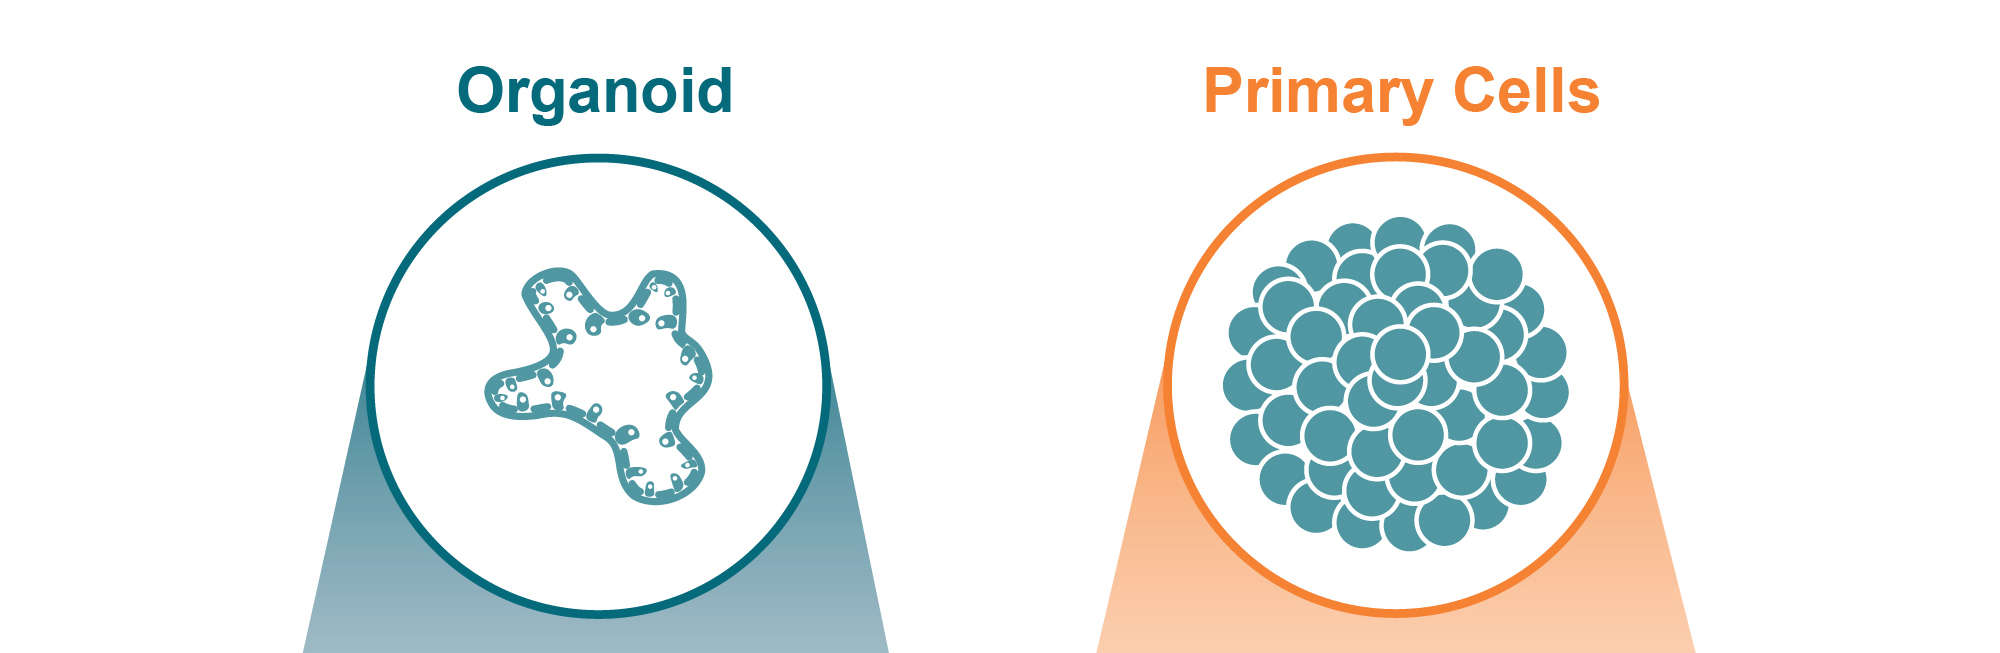 How Are Organoids Different from 3D Primary Cell Cultures?